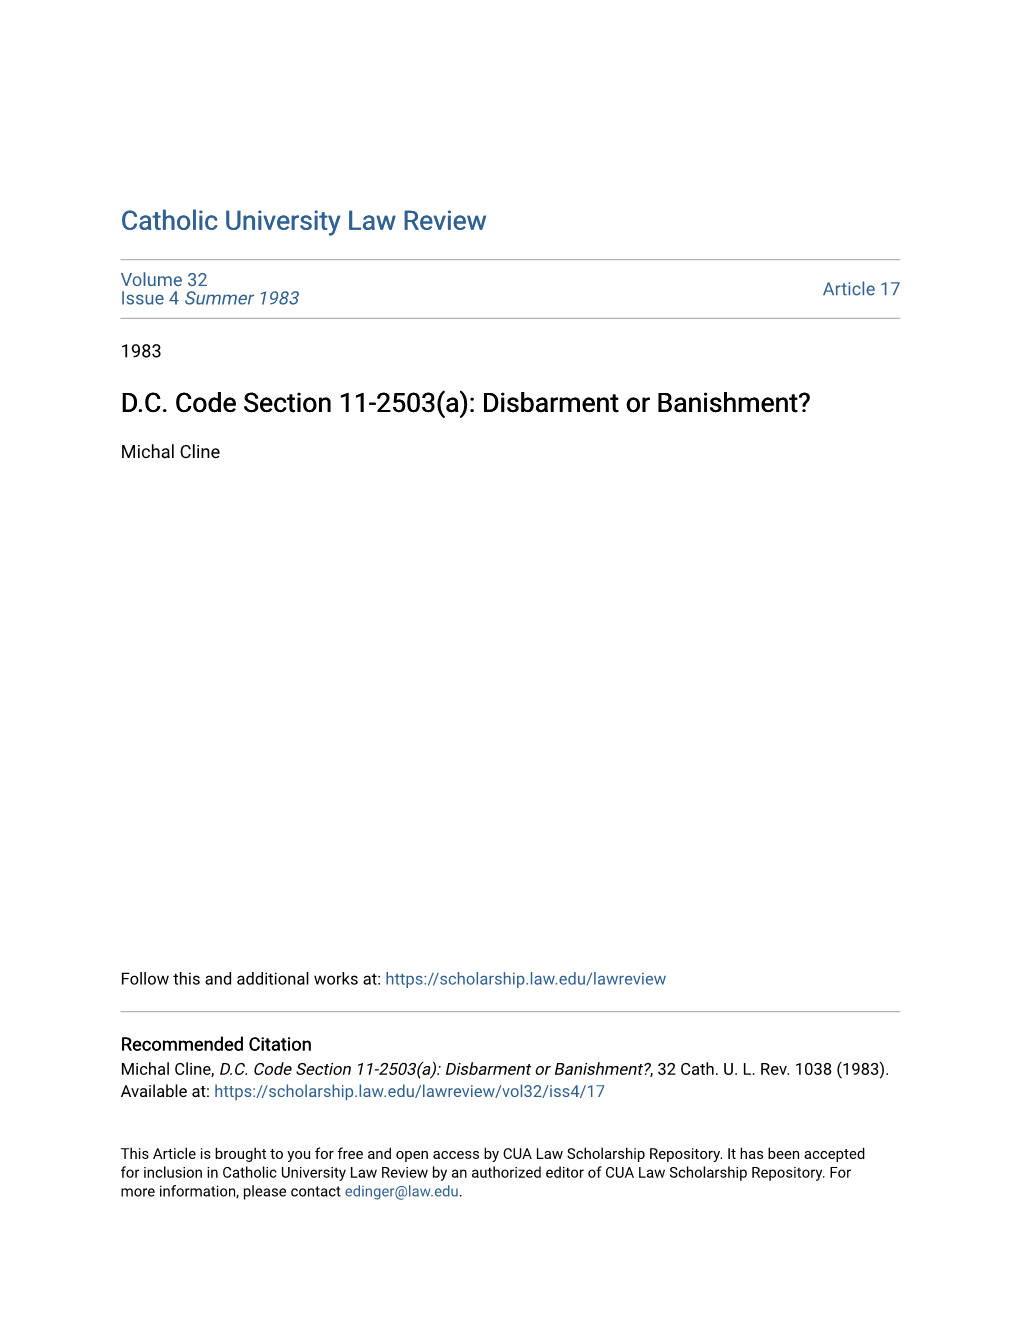 D.C. Code Section 11-2503(A): Disbarment Or Banishment?